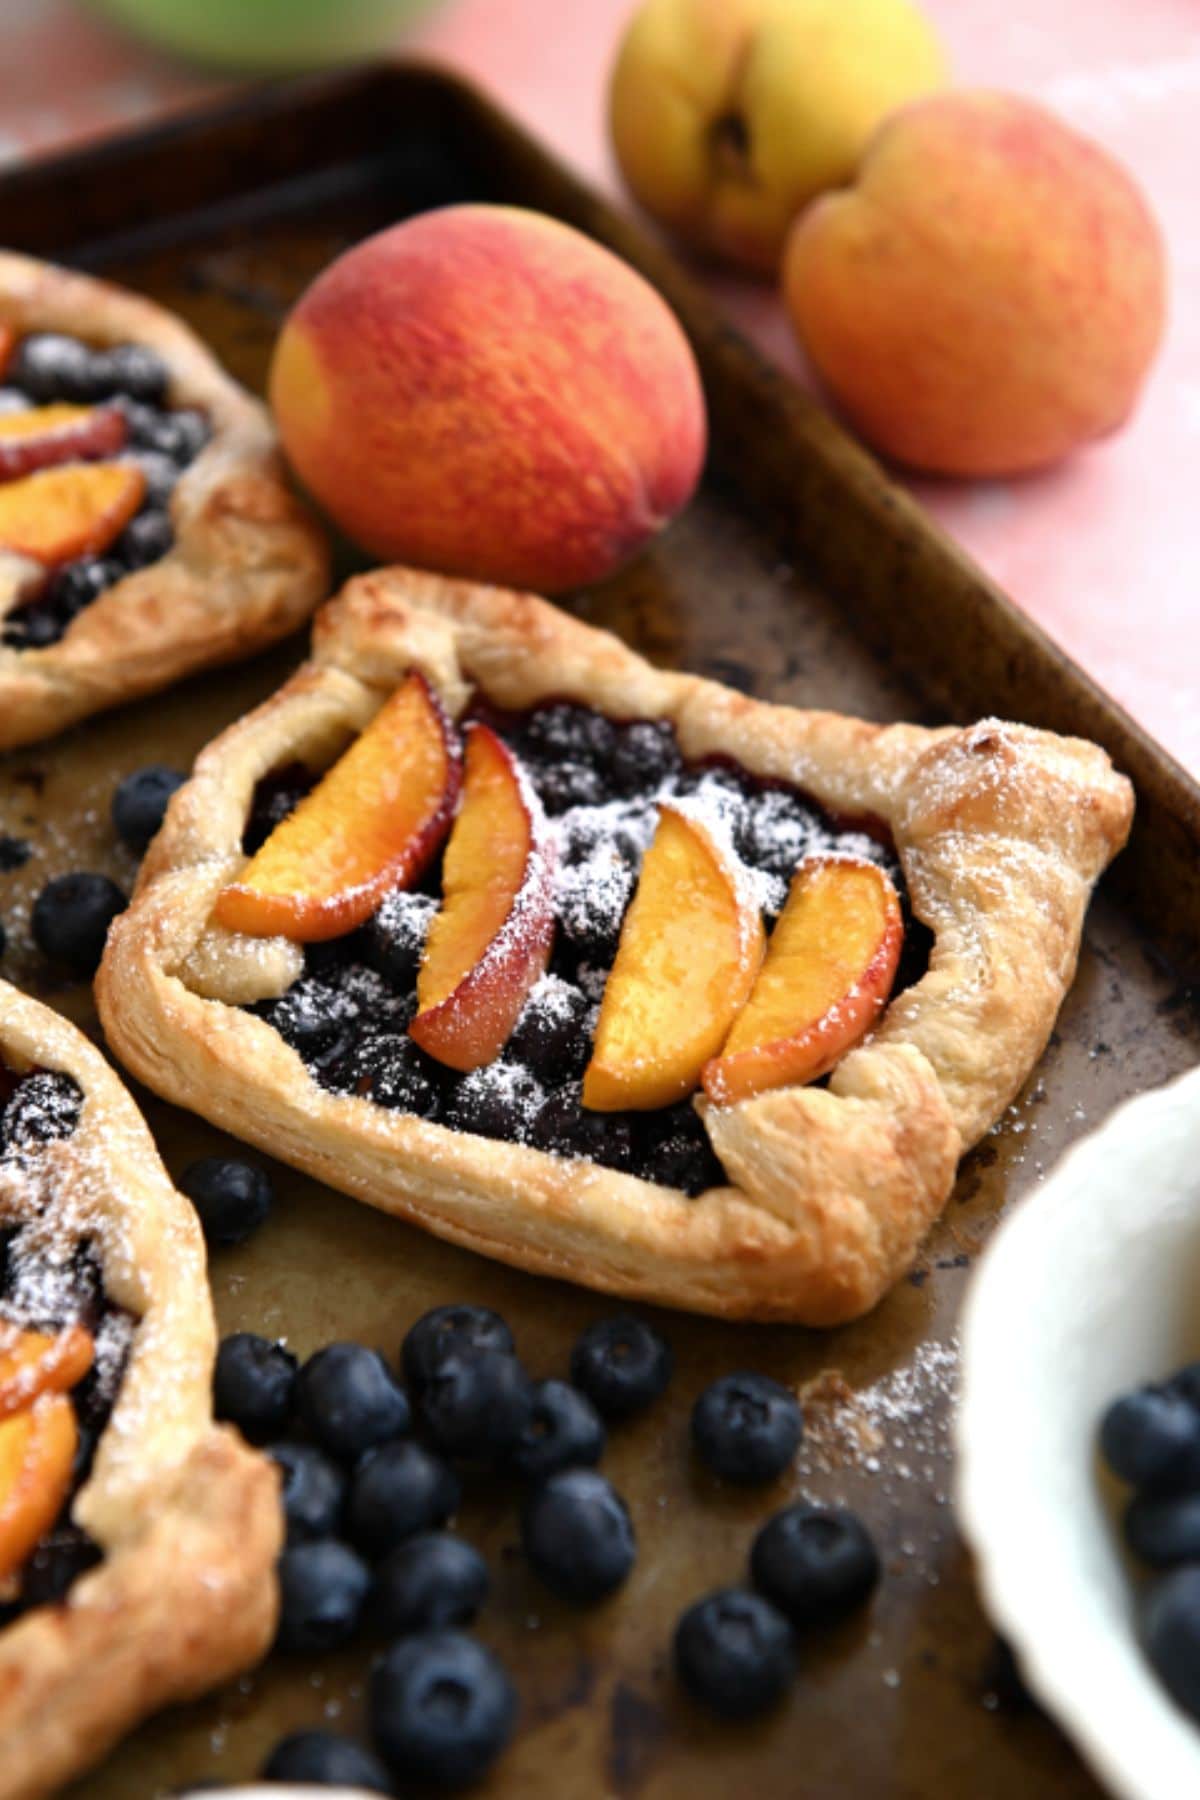 Puff pastry with blueberries and peach.